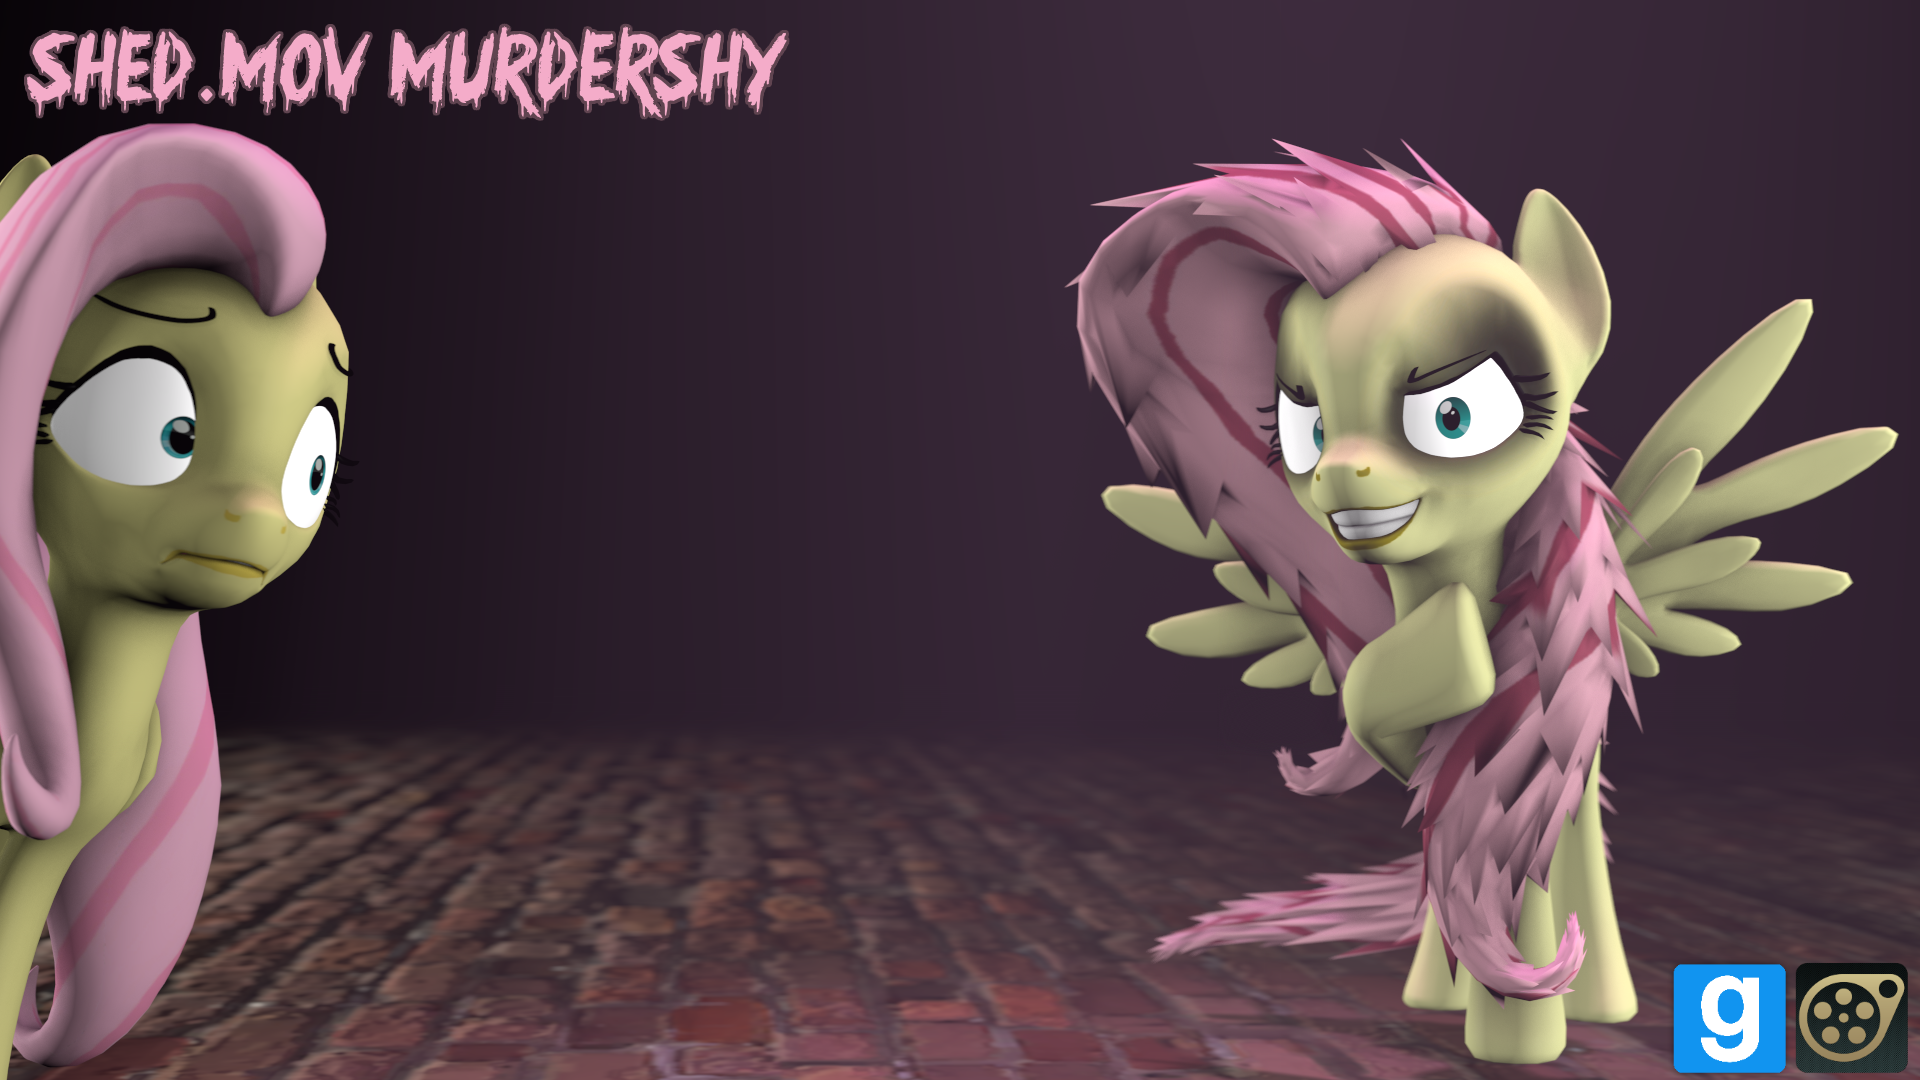 [DL] SHED.MOV Murdershy by MythicSpeed on DeviantArt